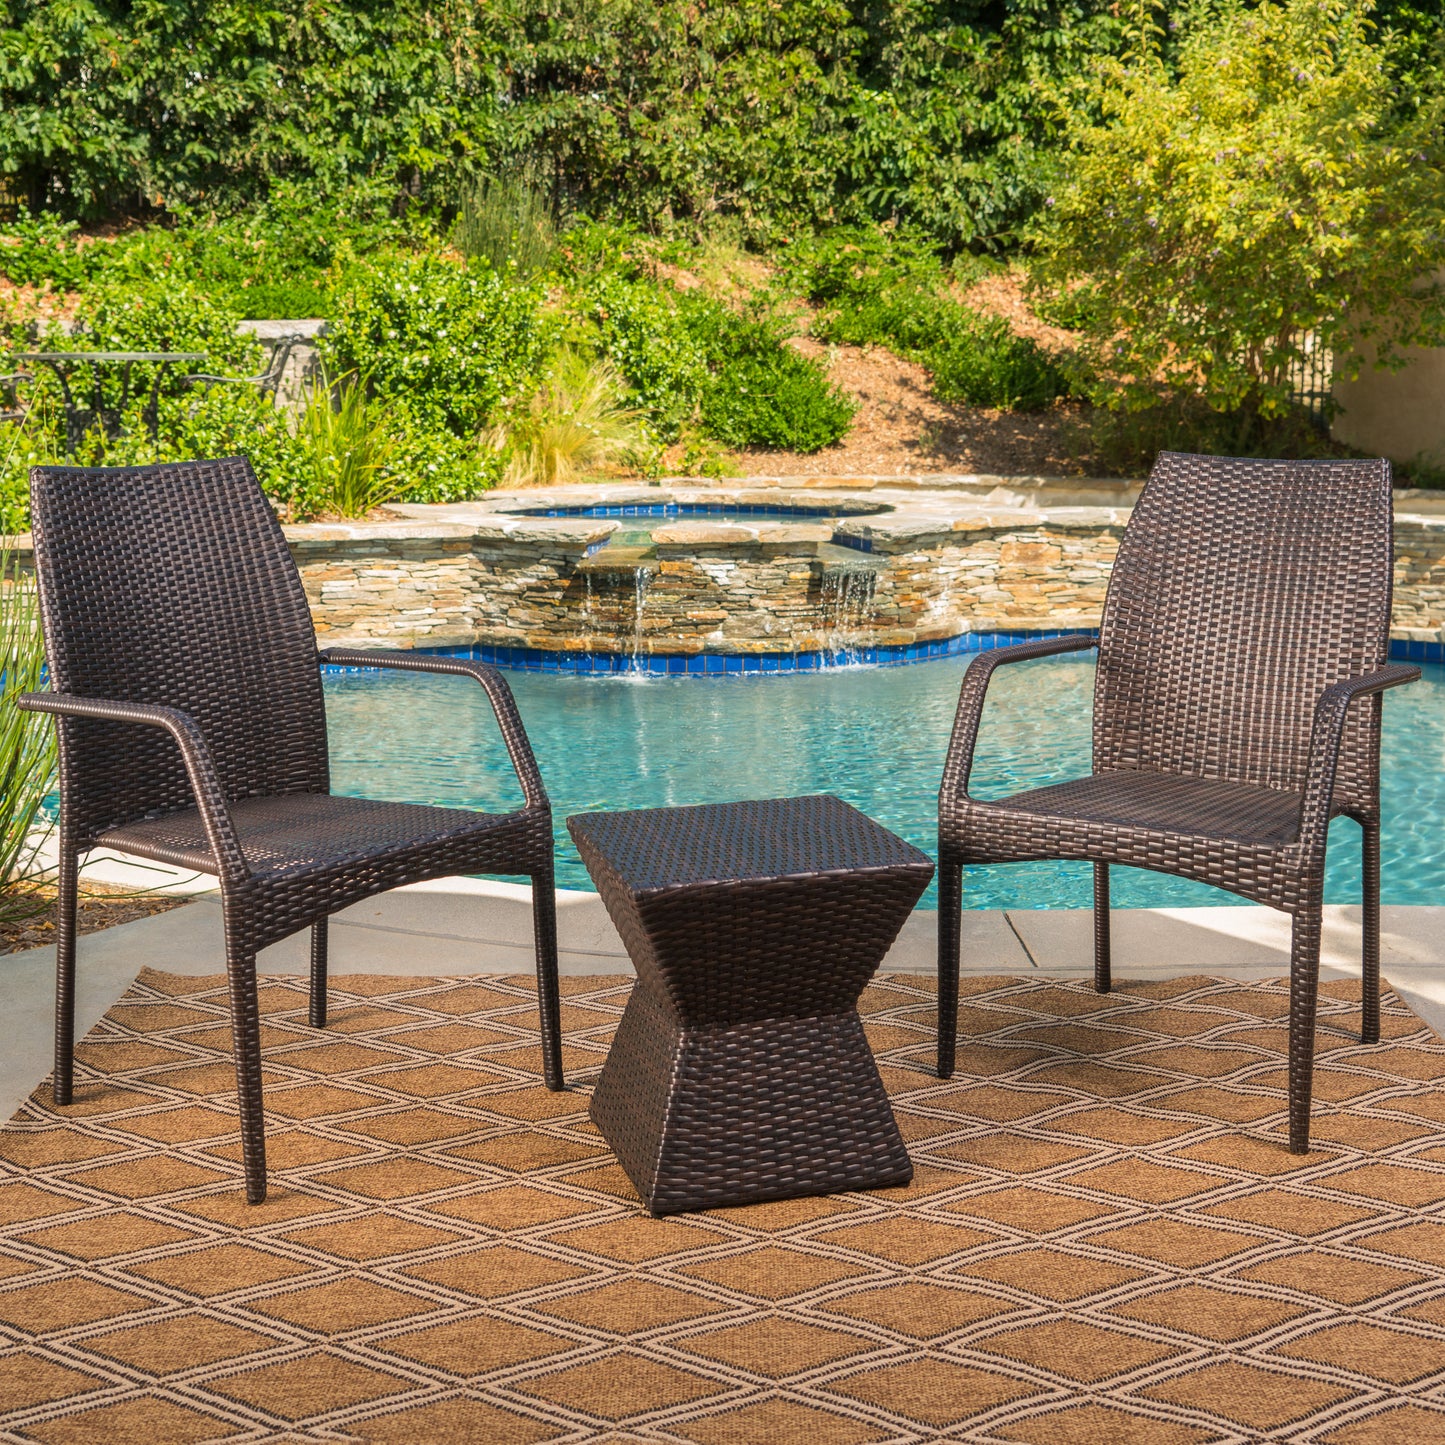 Ralsey Outdoor 3 Piece Multi-Brown Wicker Chat Set with Stacking Chairs